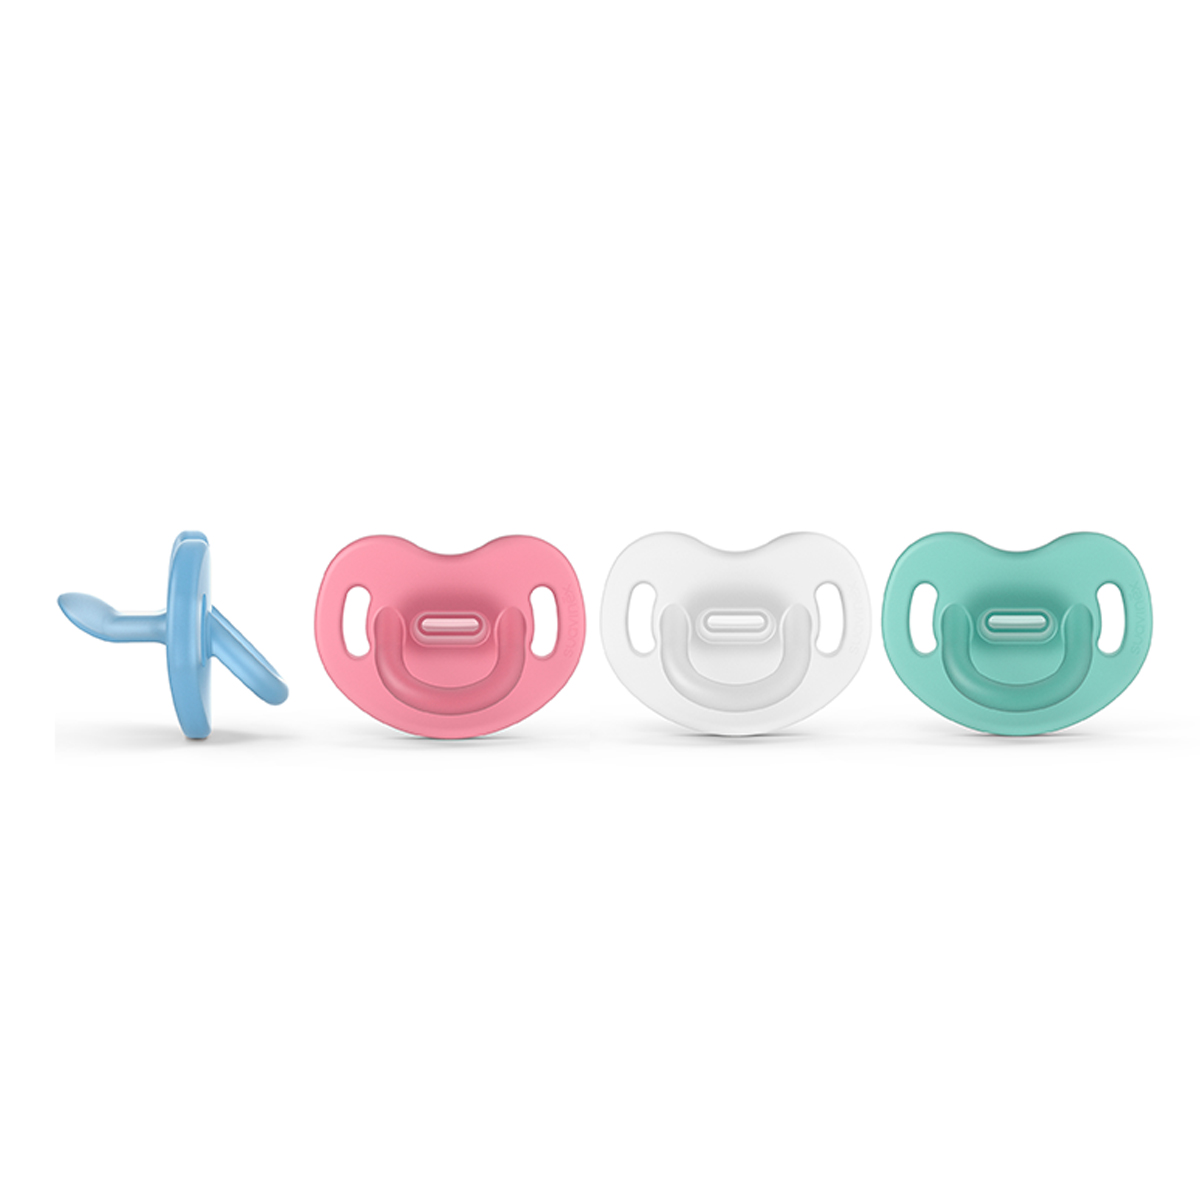 Smoothie soother (all silicone) anatomical teat 0-6m